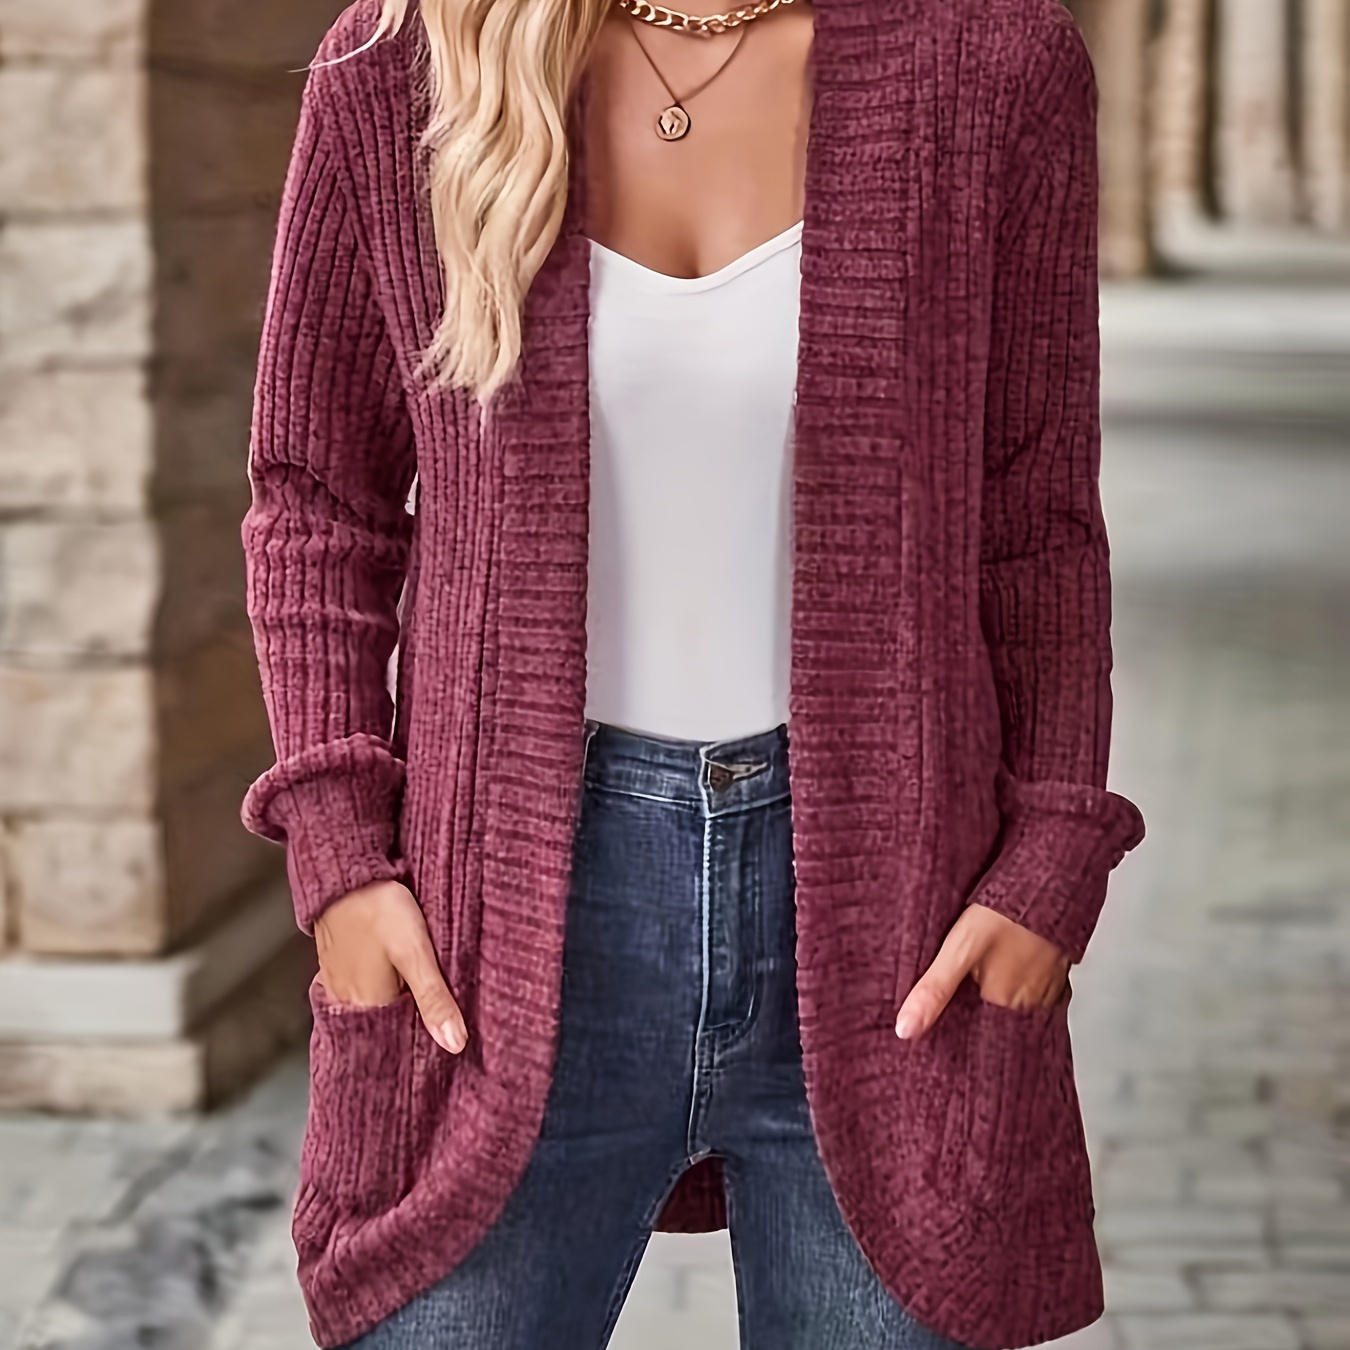 Plus Size Women's Solid Color Hooded Cardigan Coat, Casual Knitted ...